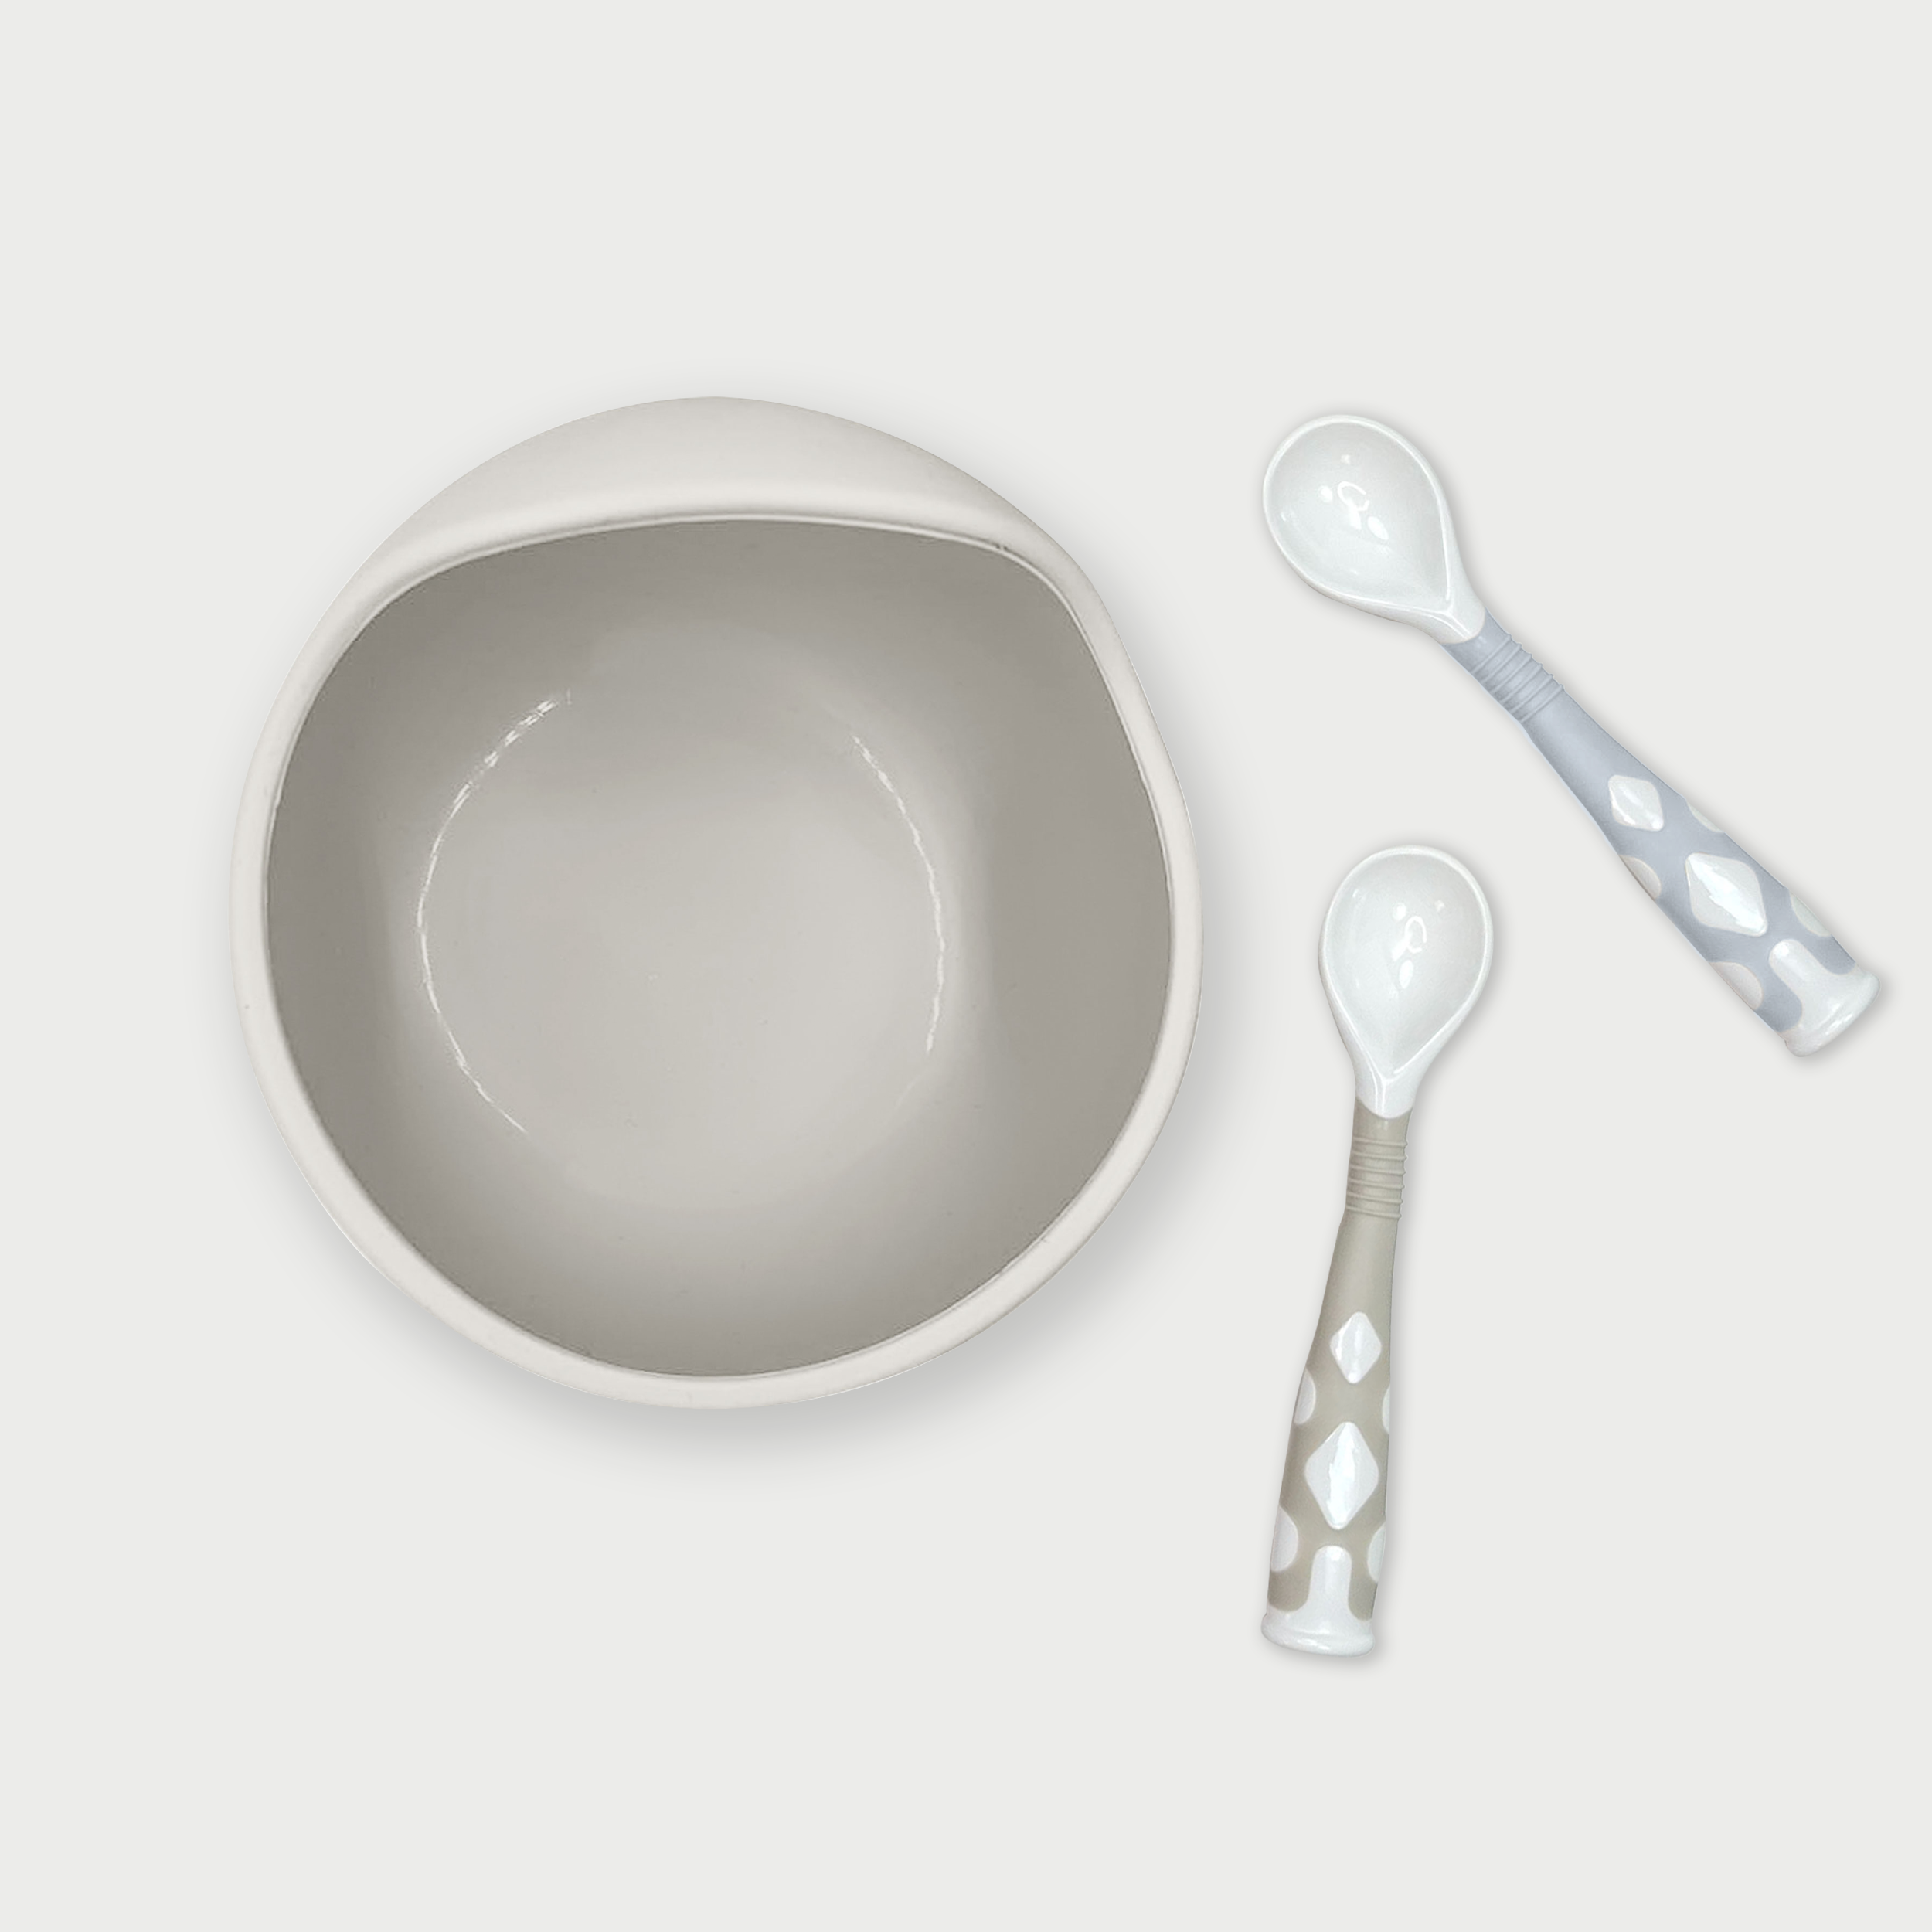 Kushies Silistages Spoons 3 Pack - Blue/Seafoam/Gray